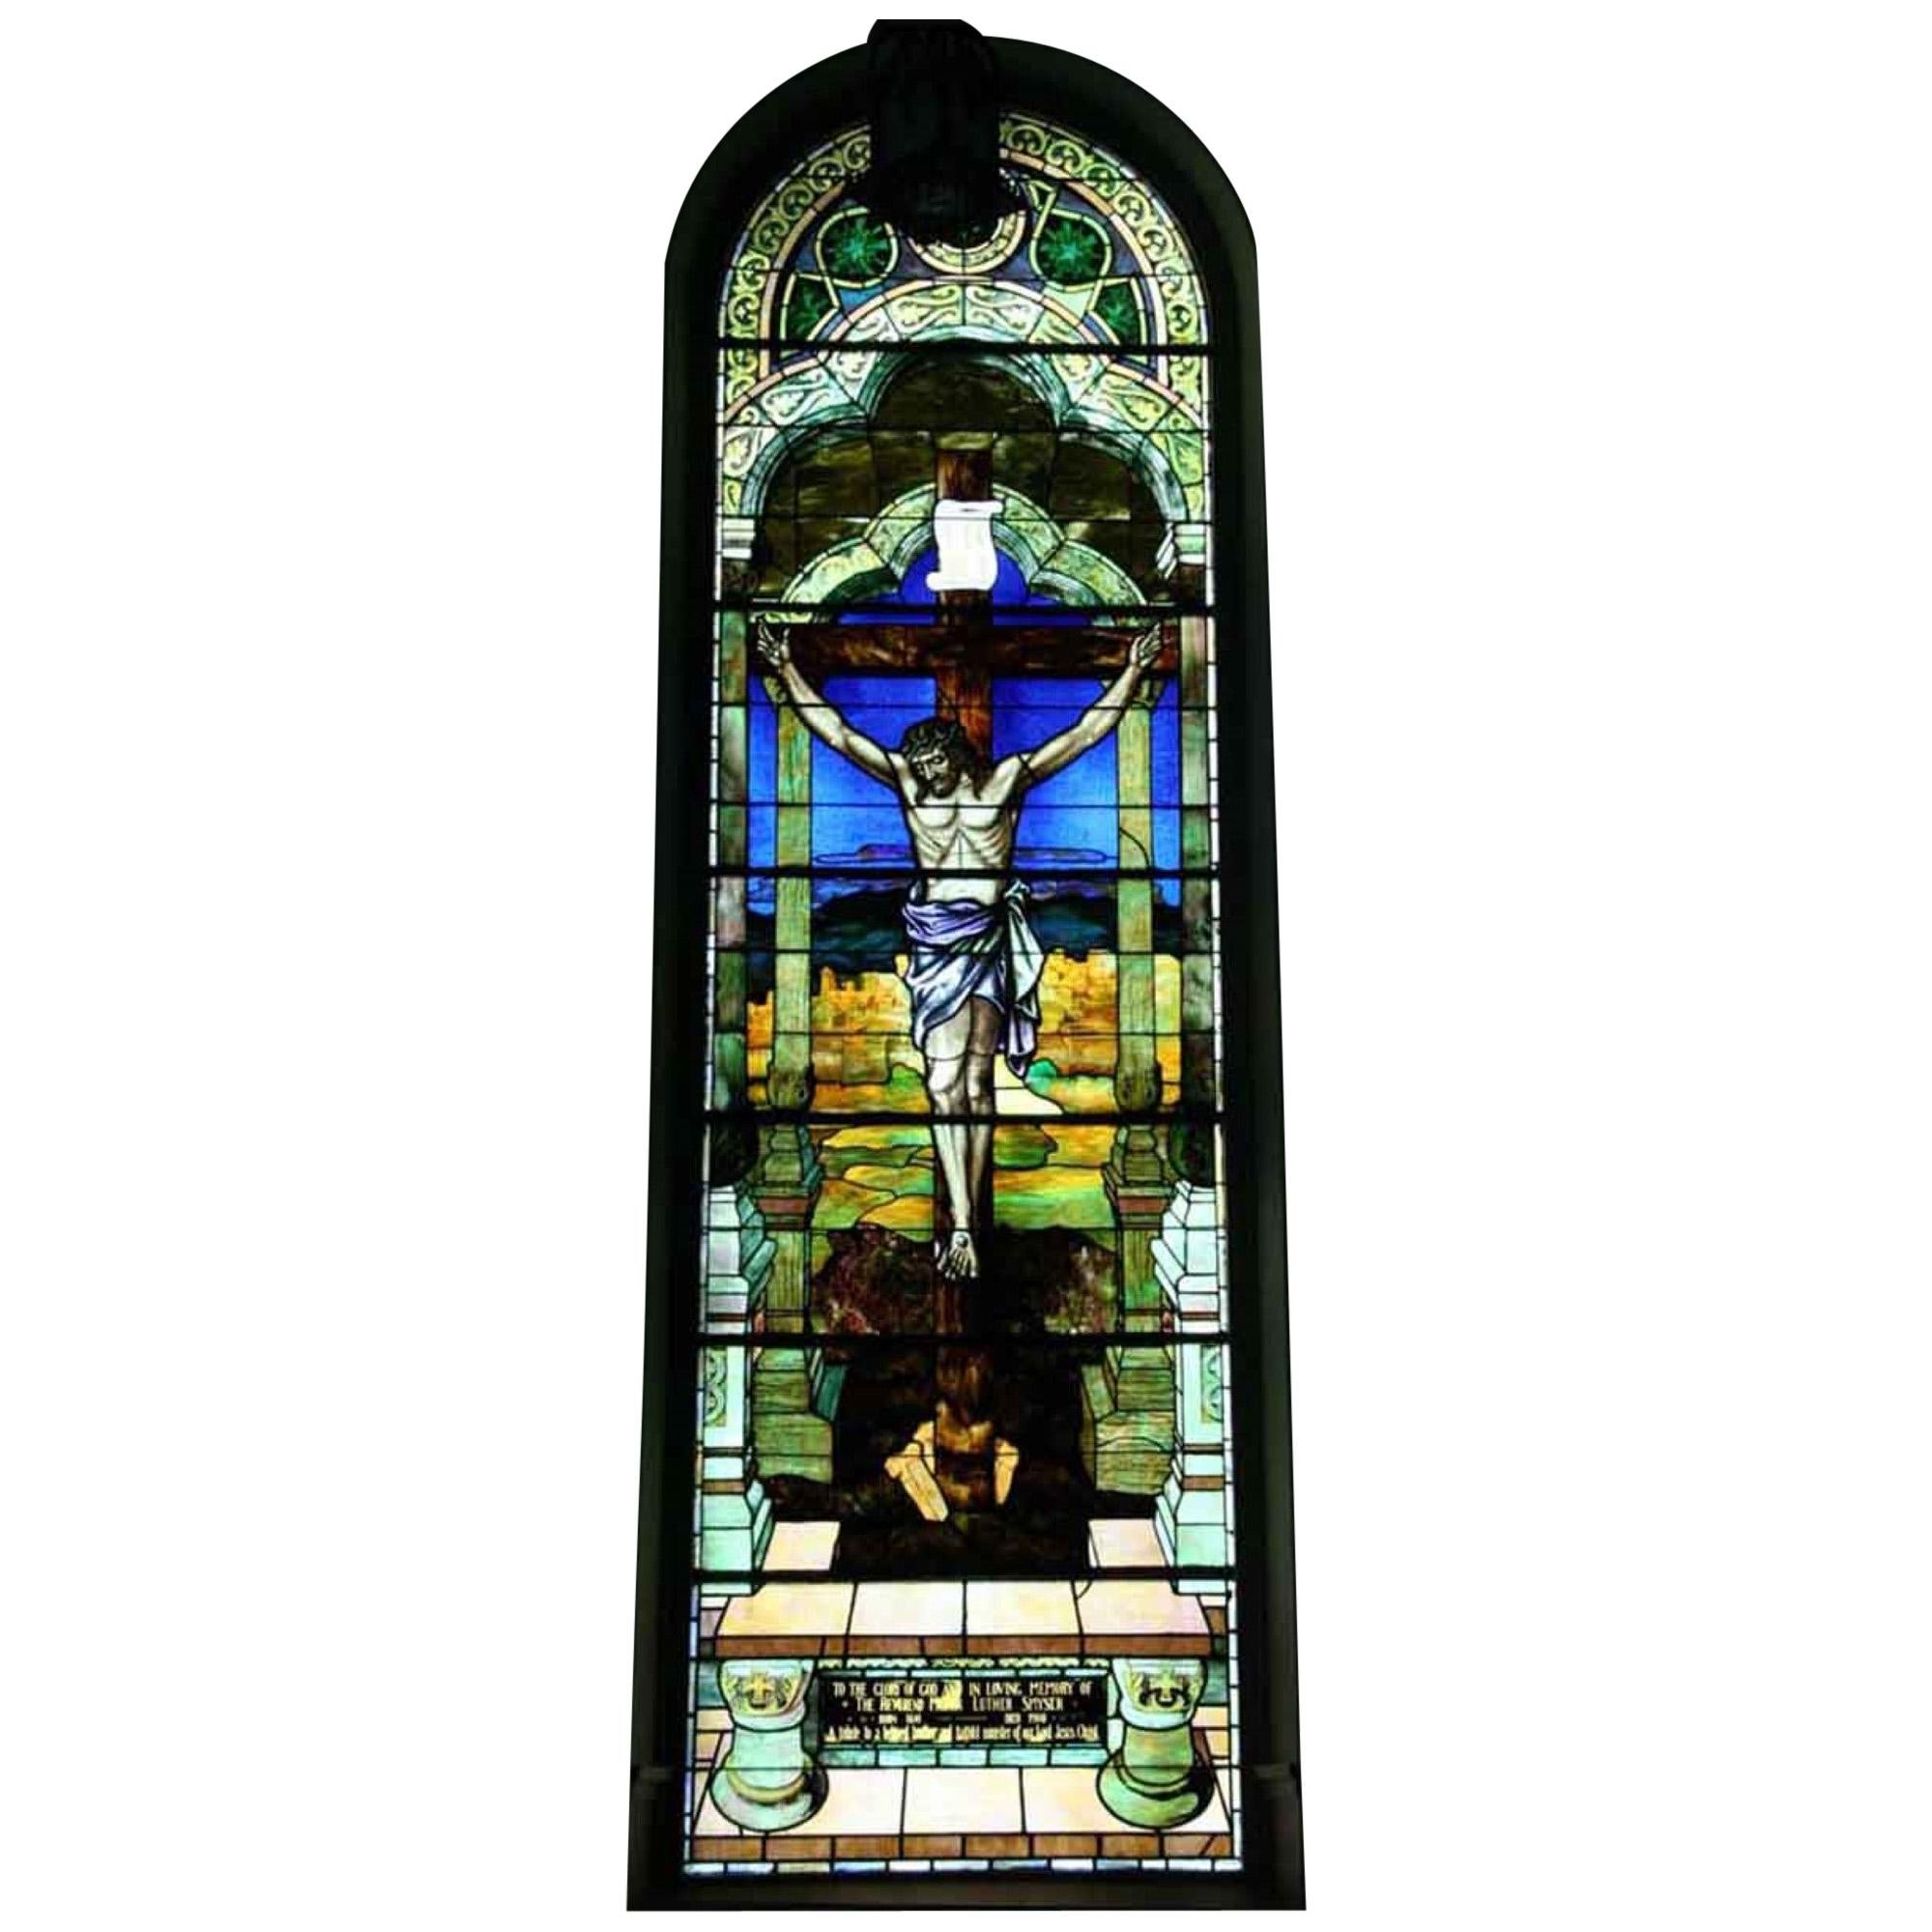 1901 Religious Large Stained Glass Portraying the Crucifixion of Our Lord Jesus